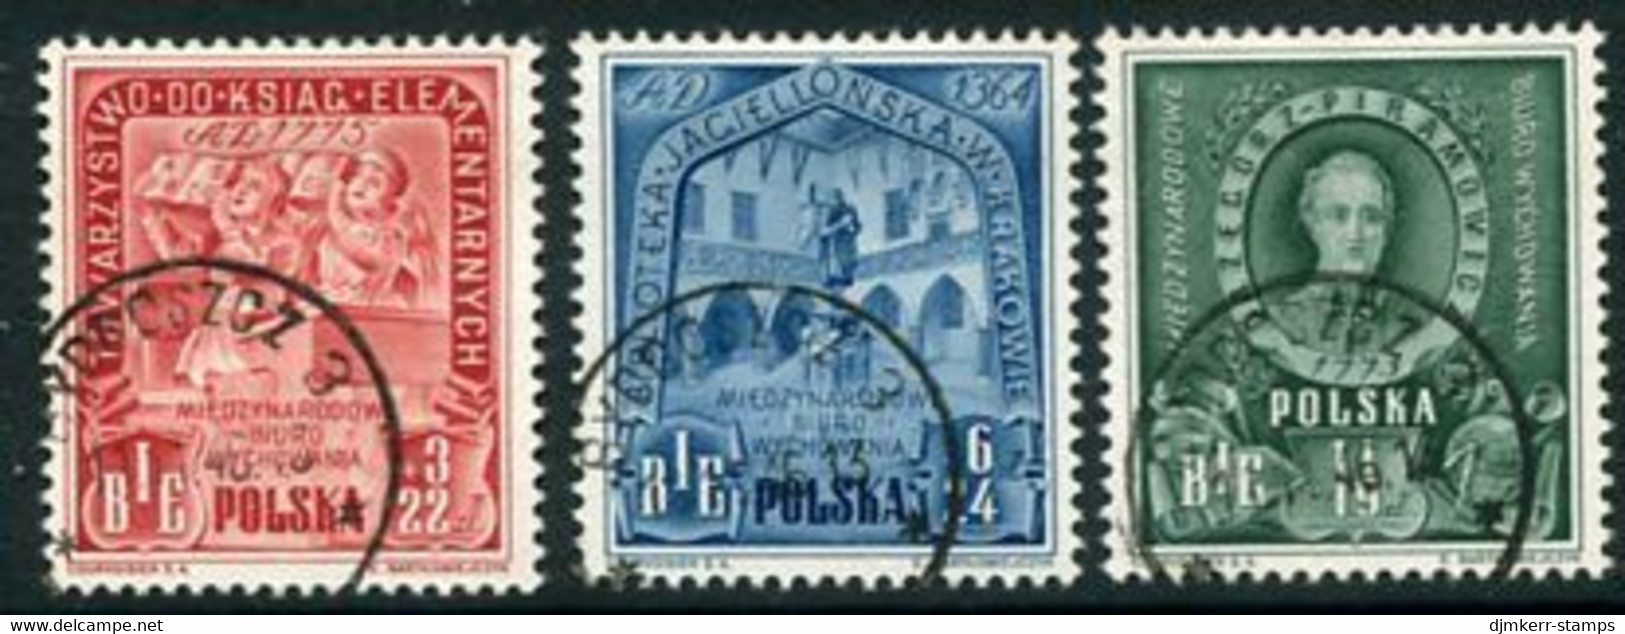 POLAND 1946 Education Fund Used.  Michel 445-47 - Used Stamps